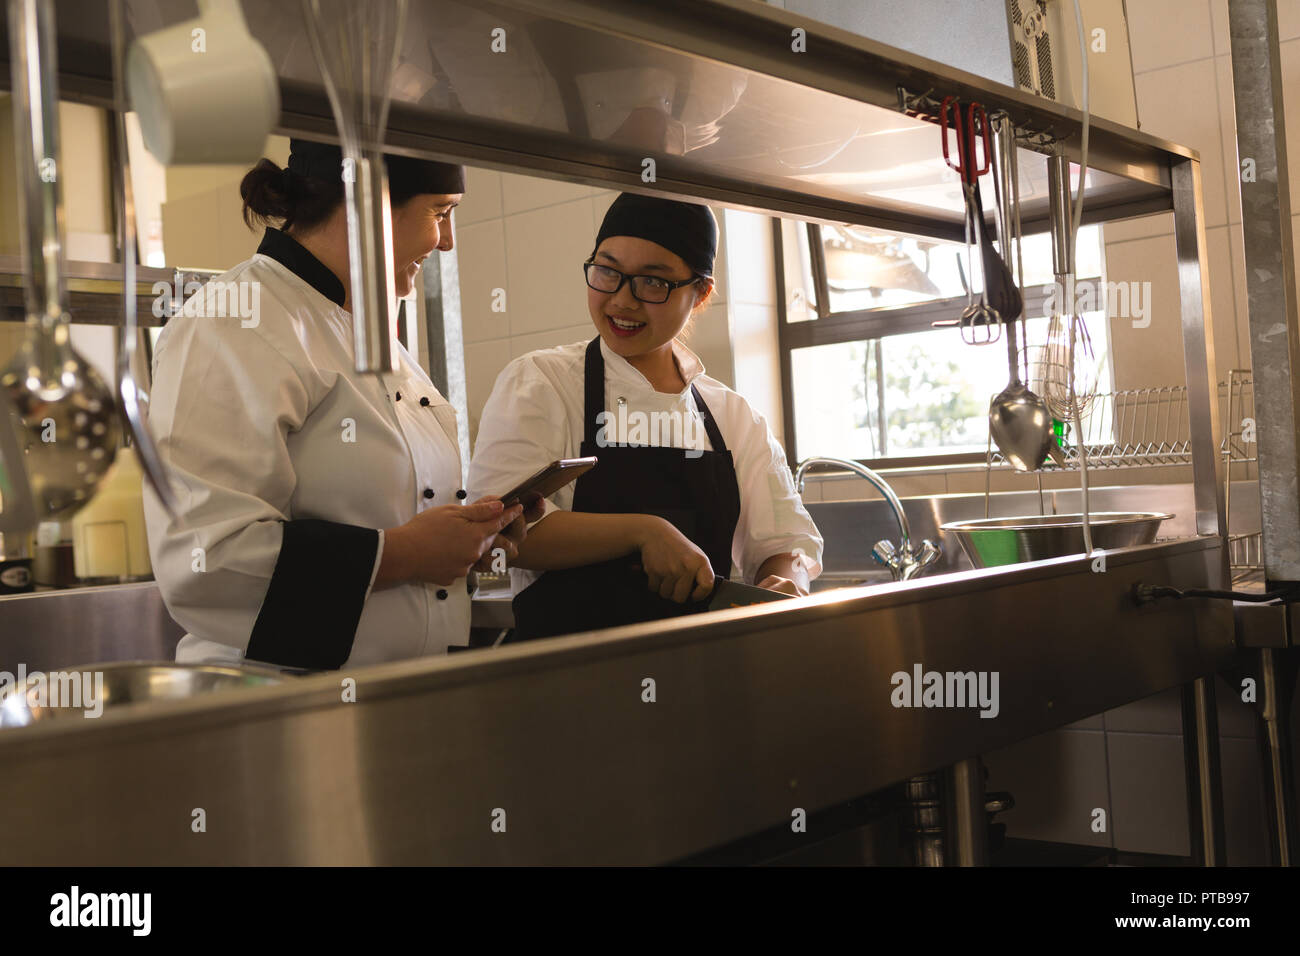 Two female chefs interacting with each other in kitchen Stock Photo